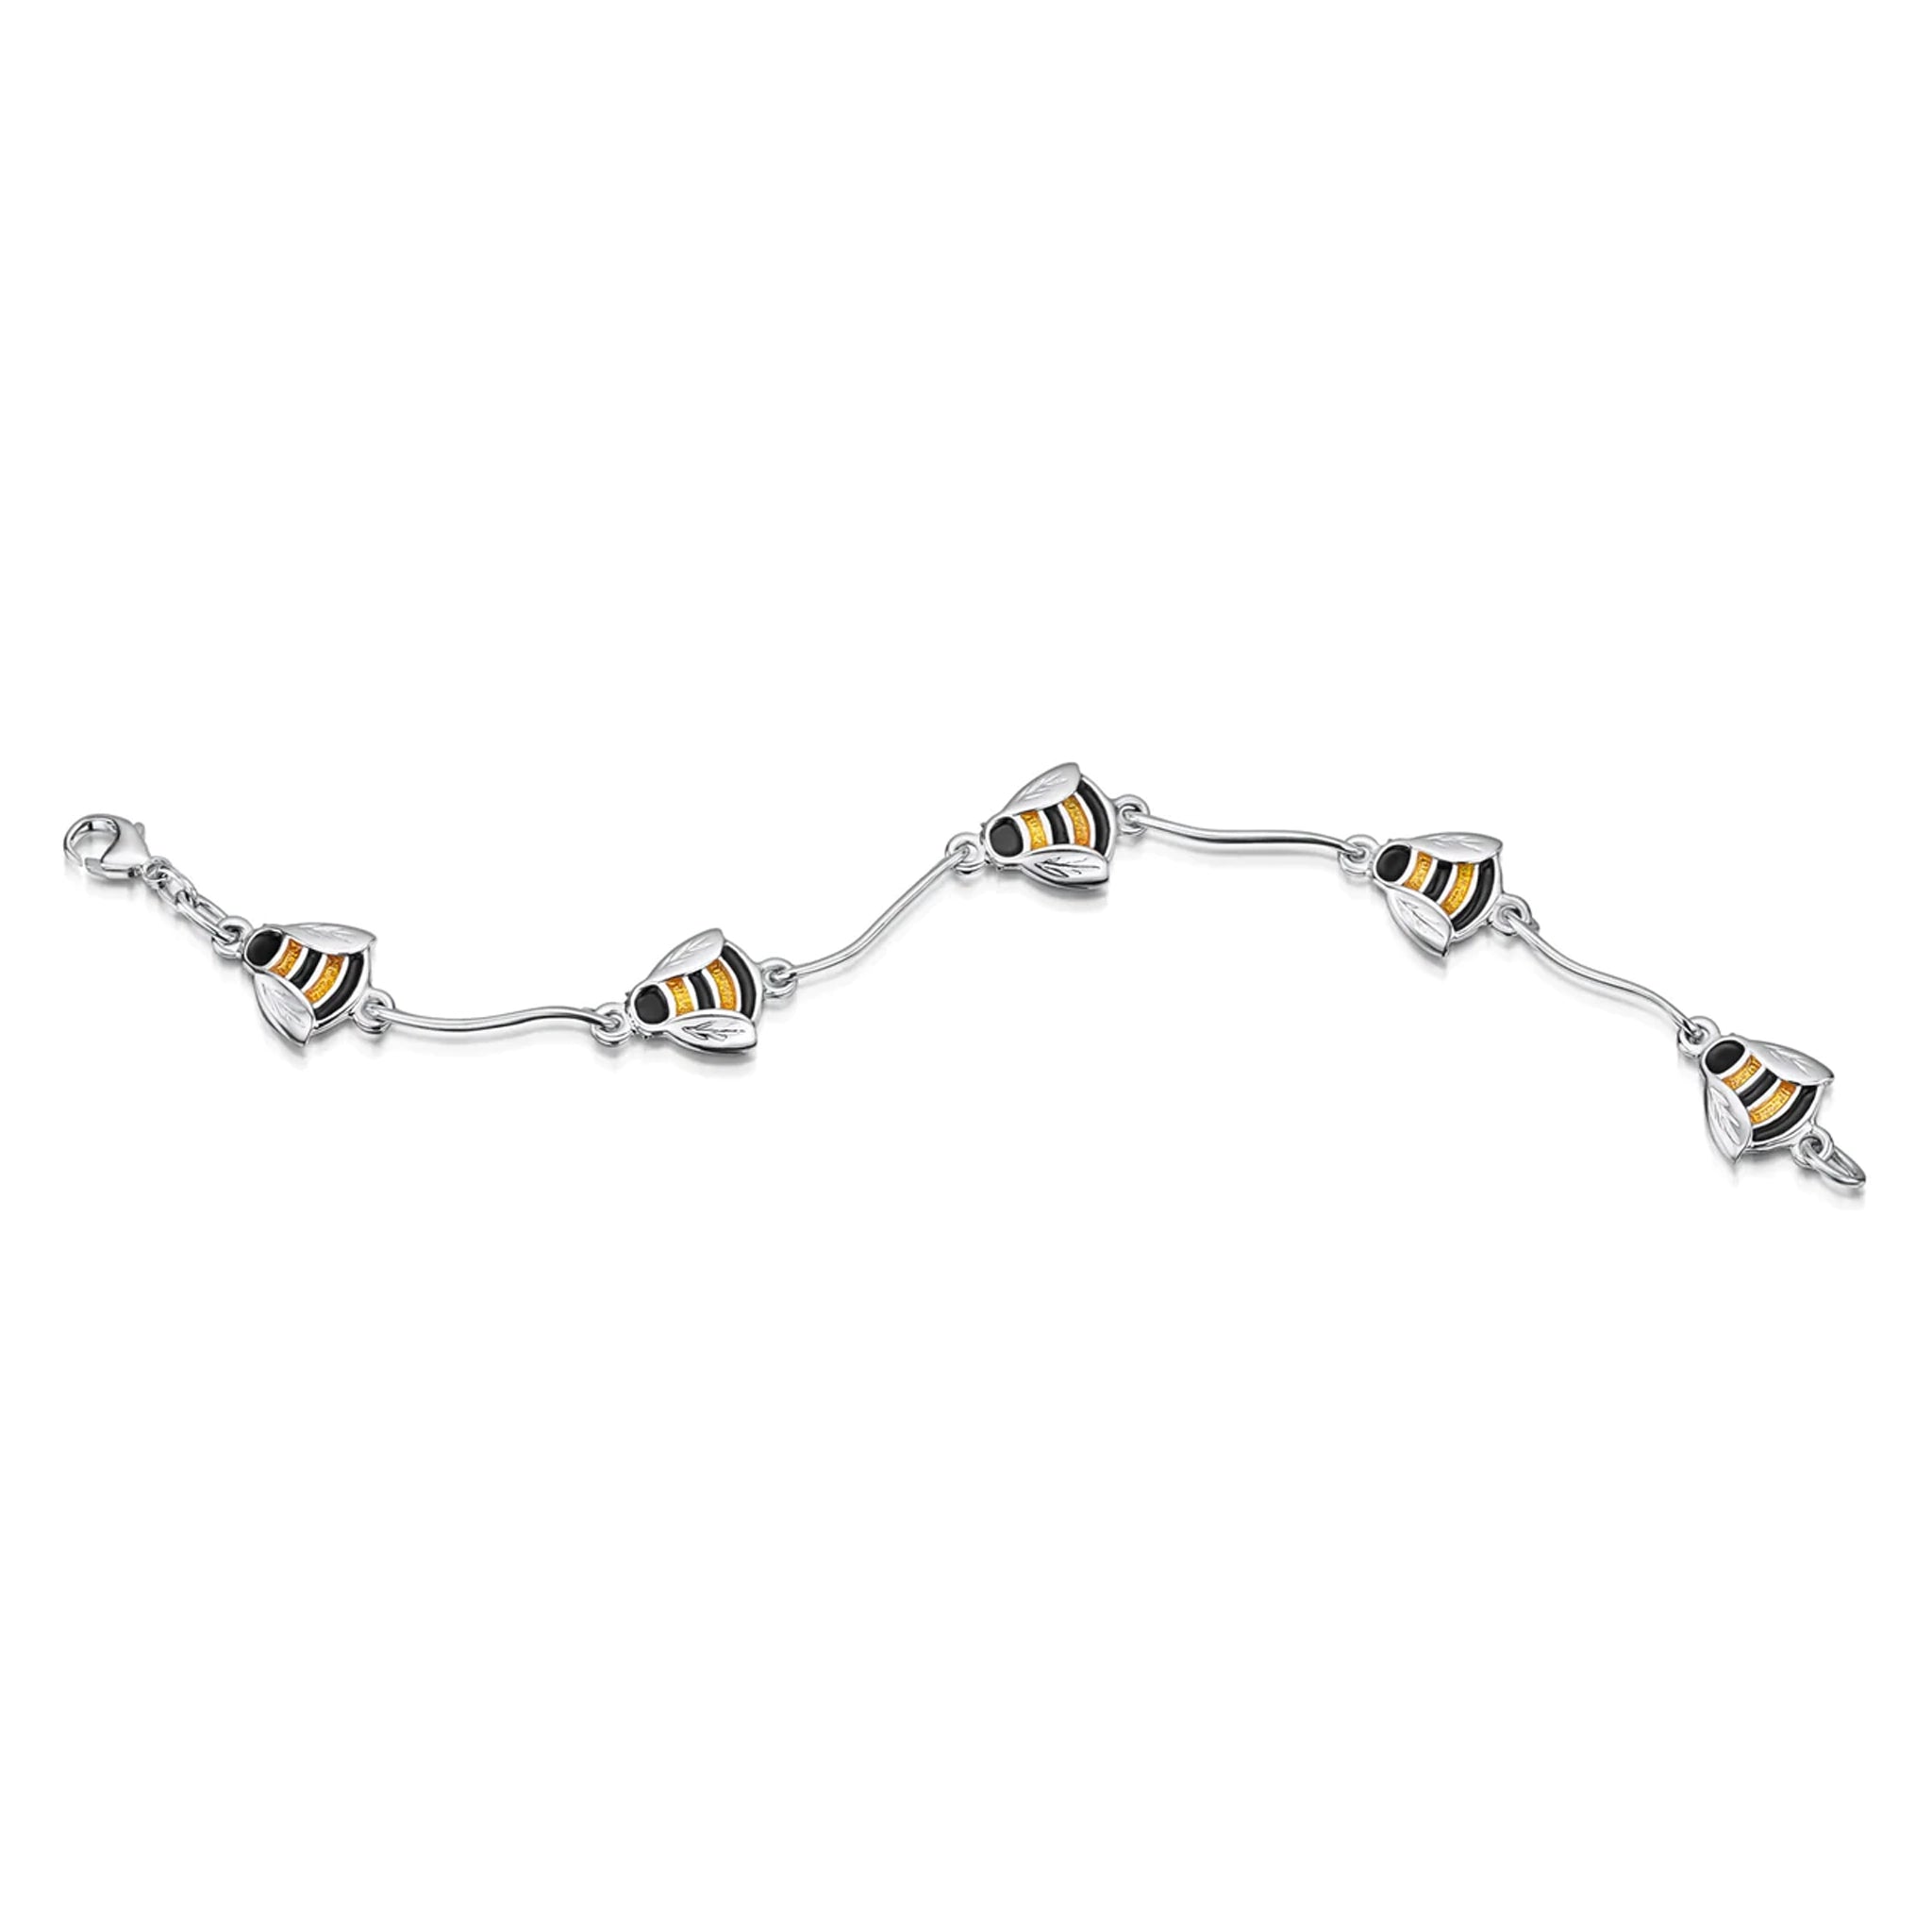 Polished silver multi-link bracelet with enamelled black and yellow bees with silver rod spacers - unfastened